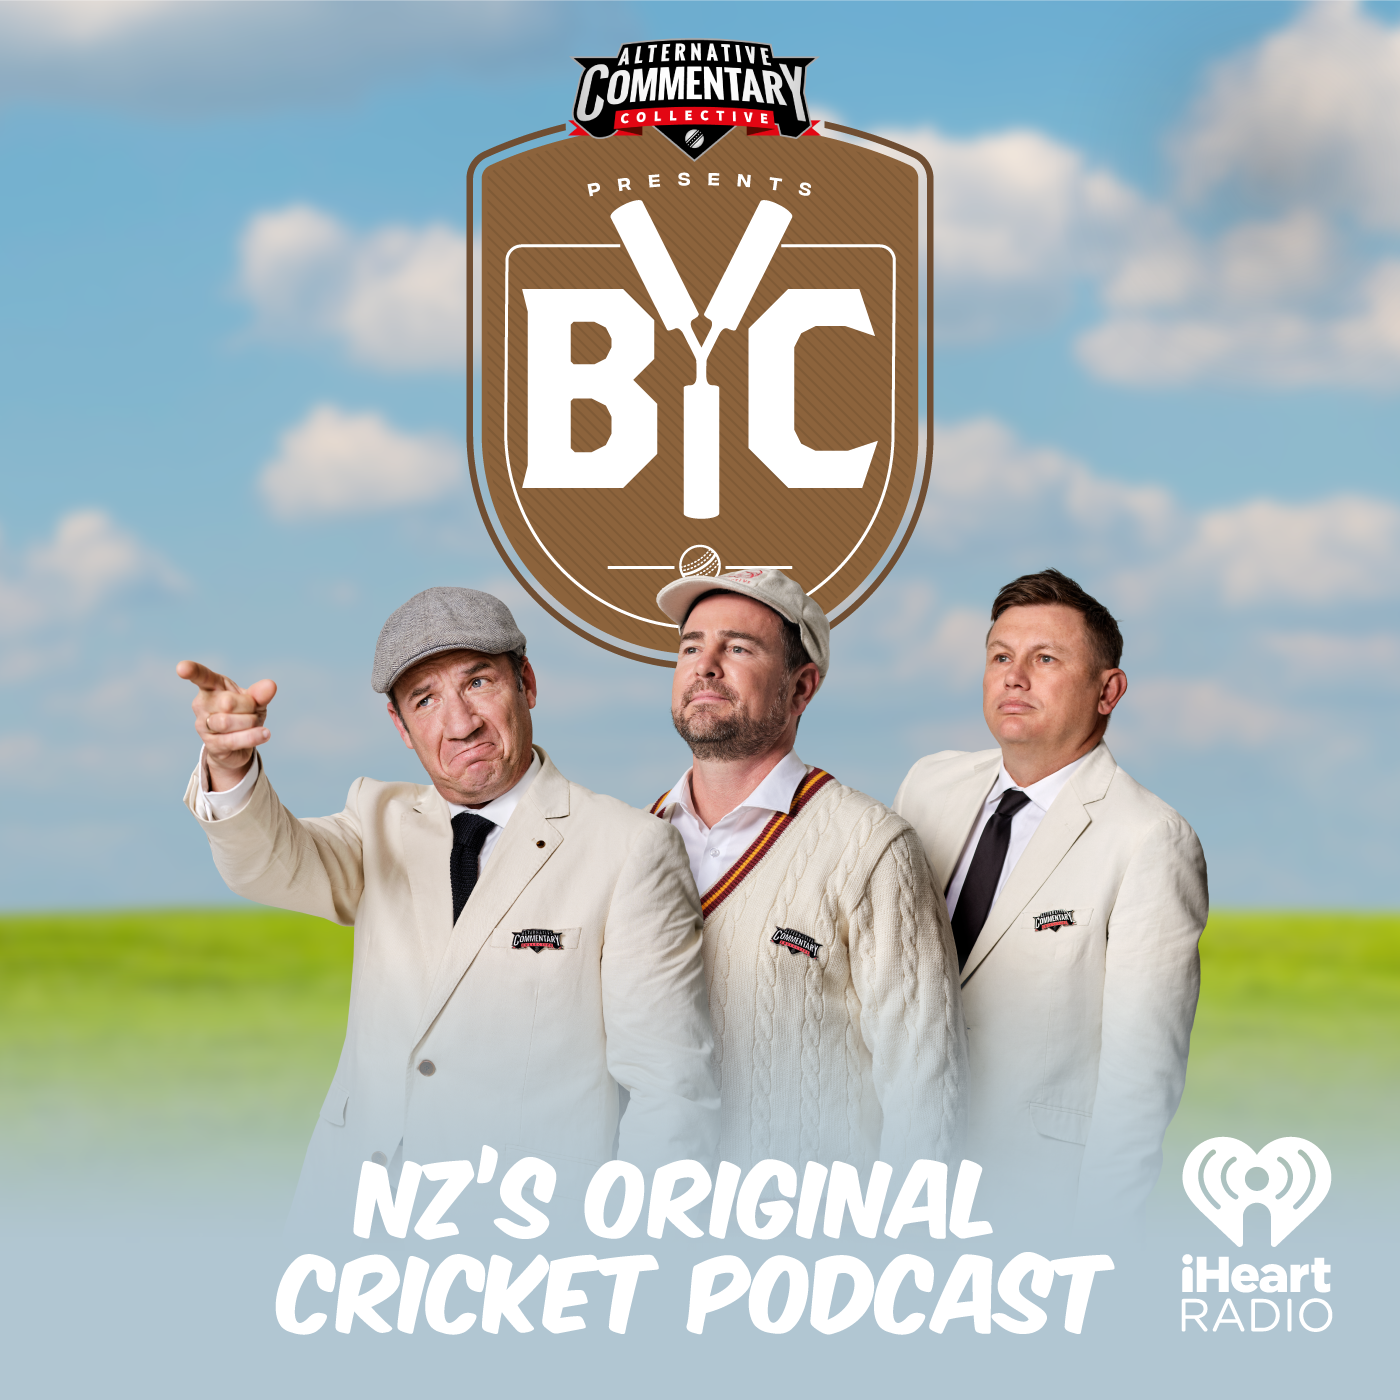 "NZ Vs Eng 2nd Test Special - Notes From The Basin: Day 4"